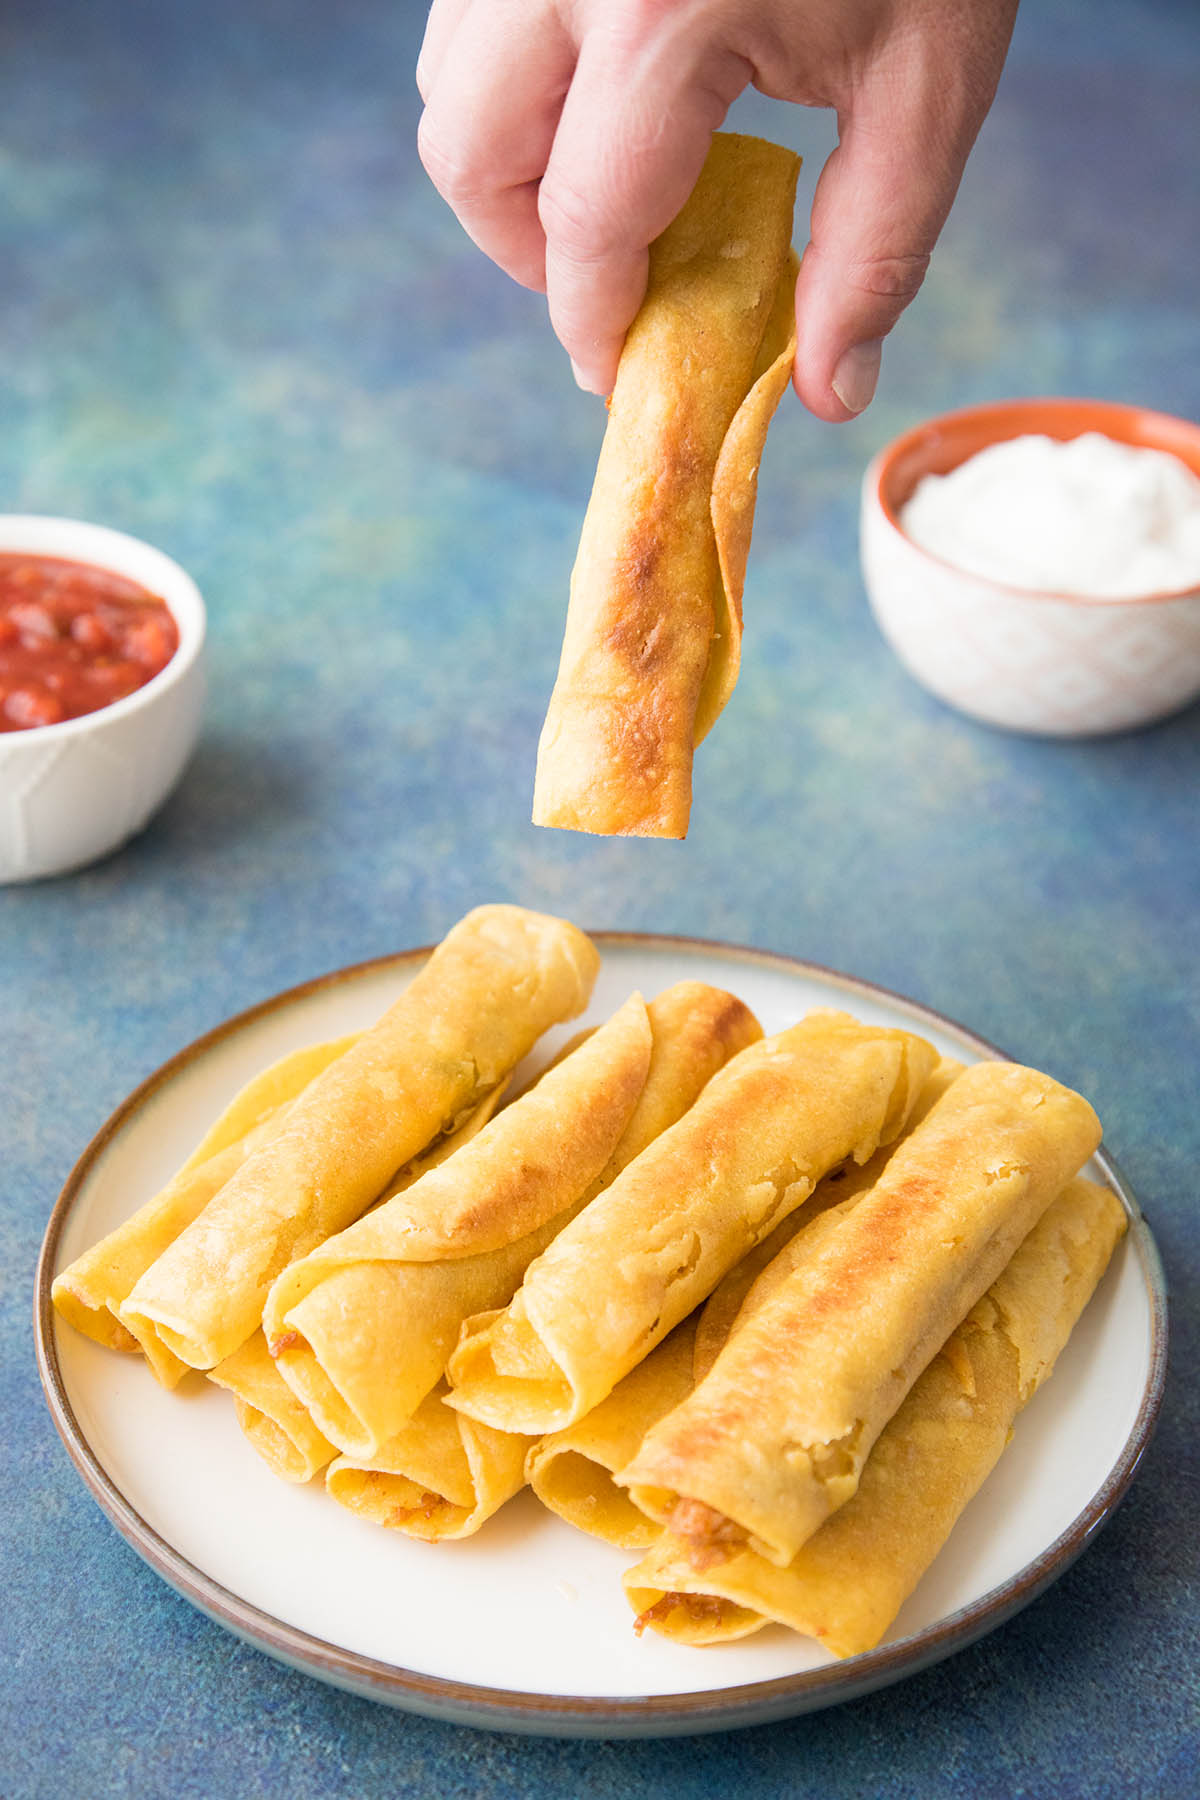 Chicken Taquitos - Grabbing one and ready to dip it in salsa to eat.